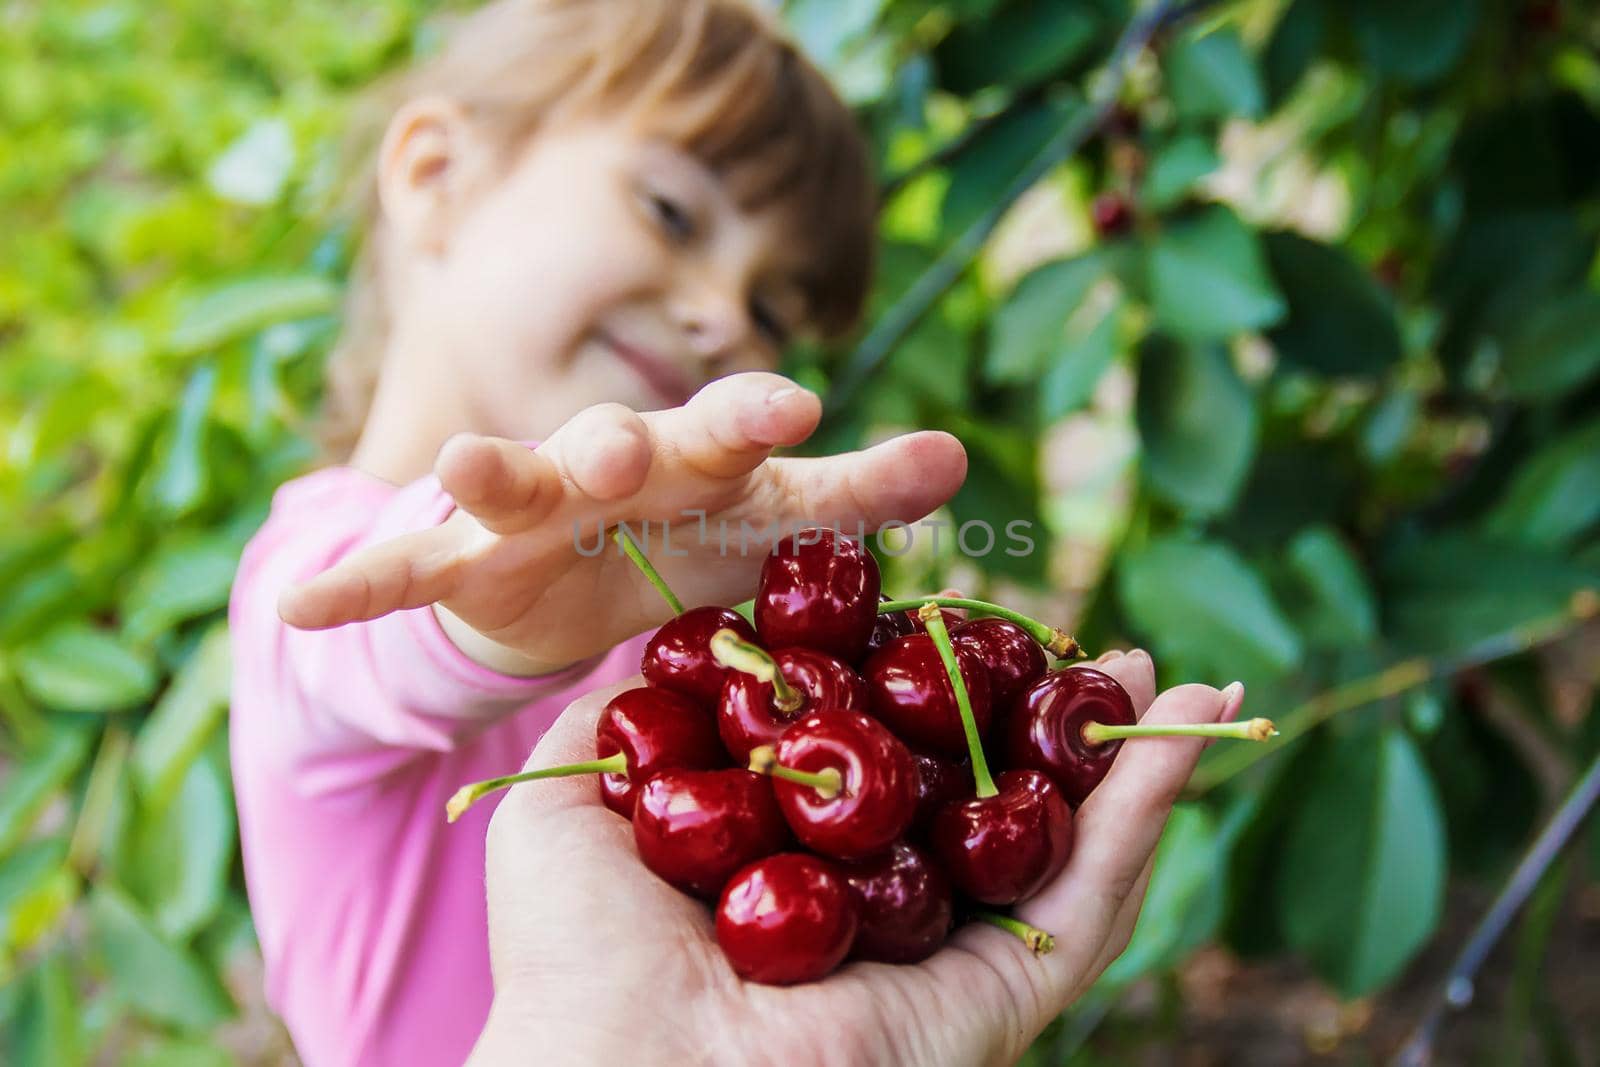 The child is picking cherries in the garden. Selective focus.